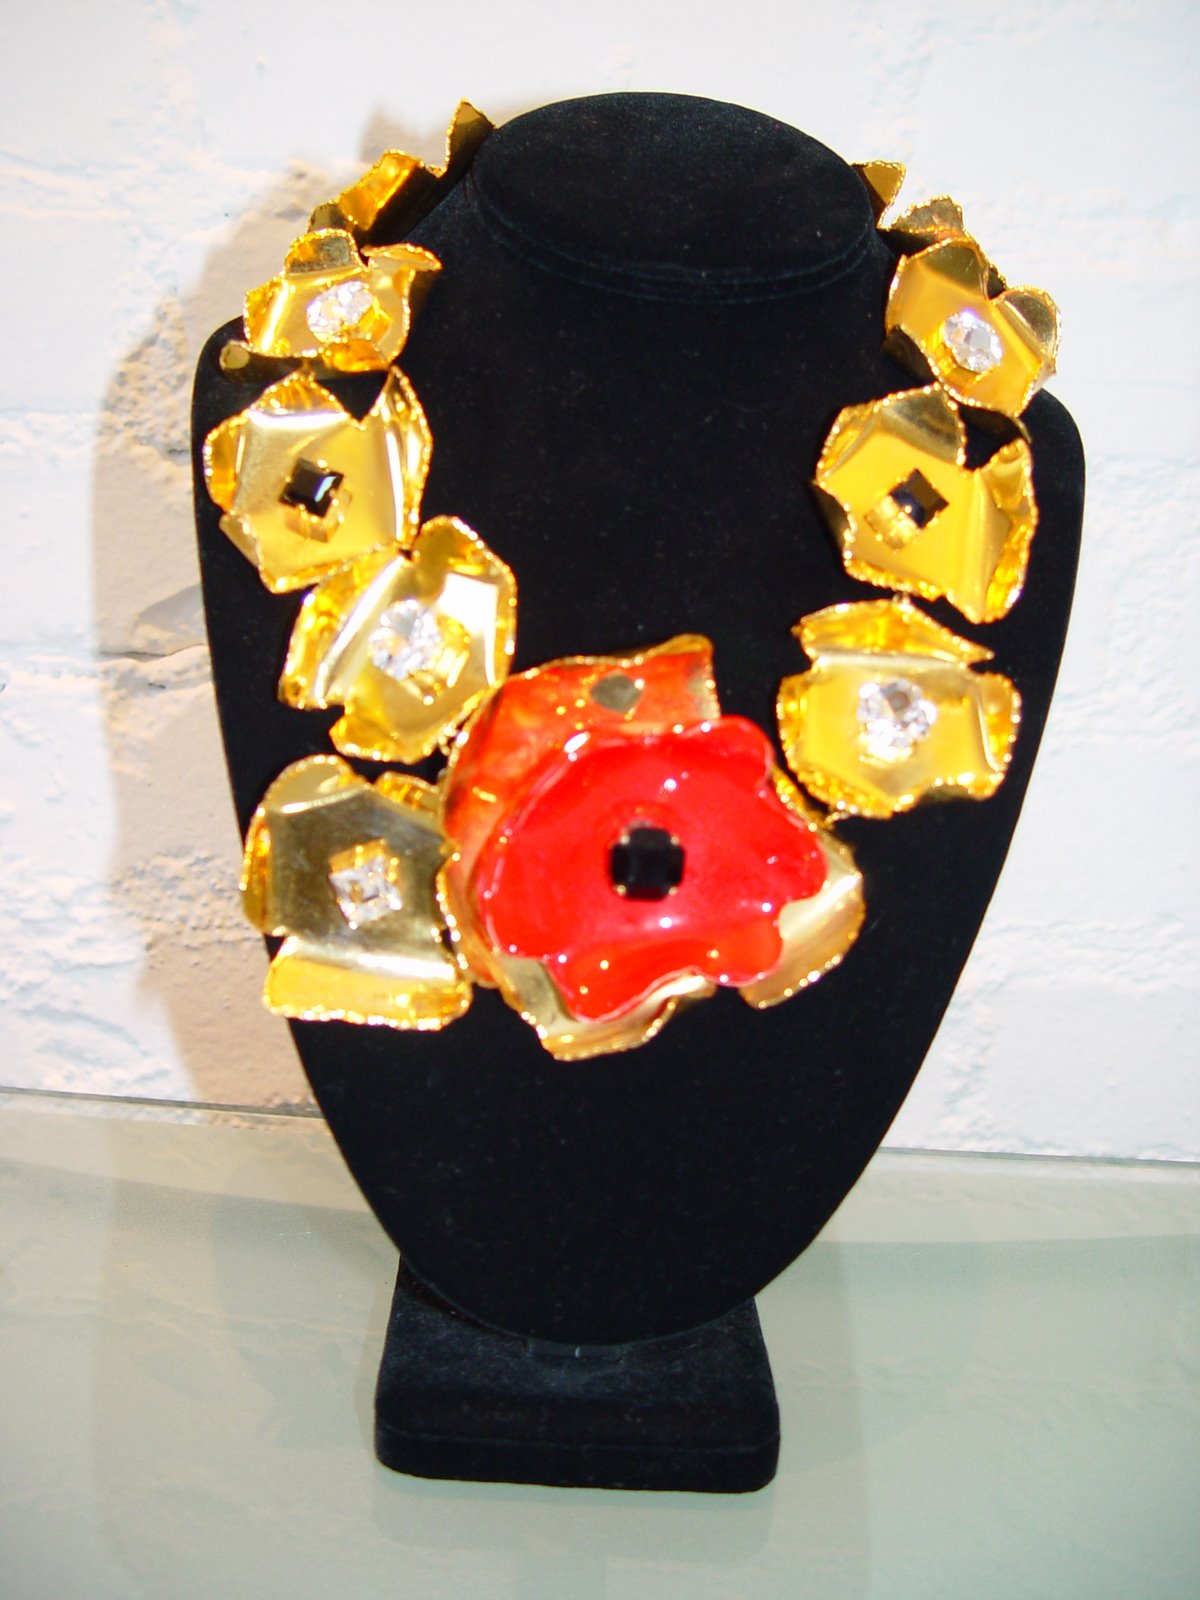 [YSL+RIVE+GAUCHE+AMAZING+GOLD+FLOWER+NECKLACE+WITH+RED+CENTER.JPG.JPG]